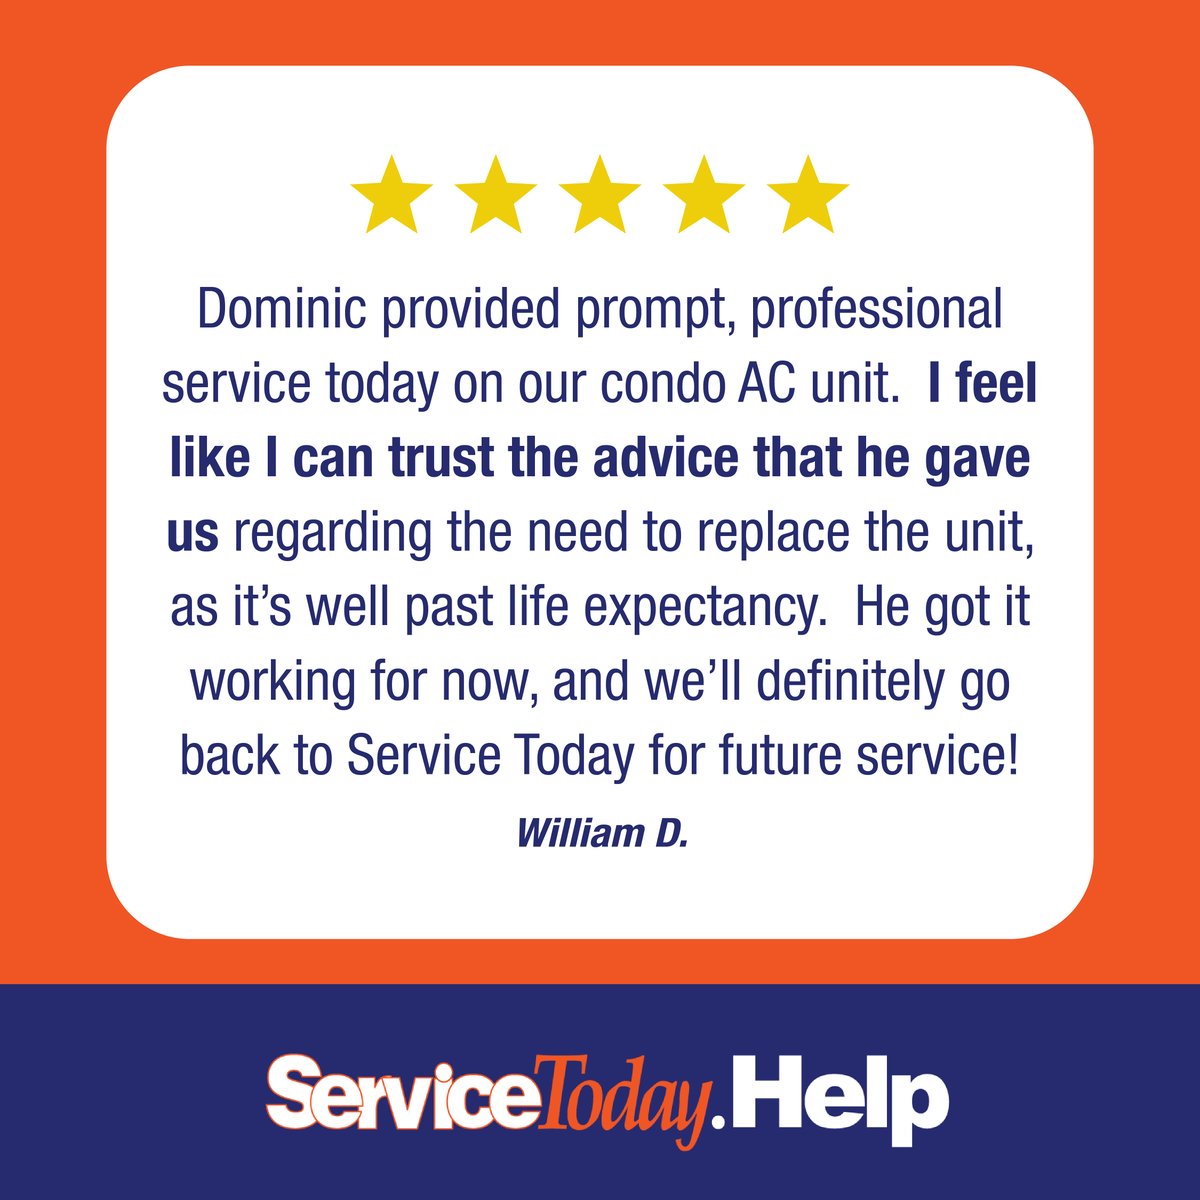 When it's hot outside, and your A/C system has issues, you can trust the expert technicians at ServiceToday for same-day service with a 100% satisfaction guarantee!